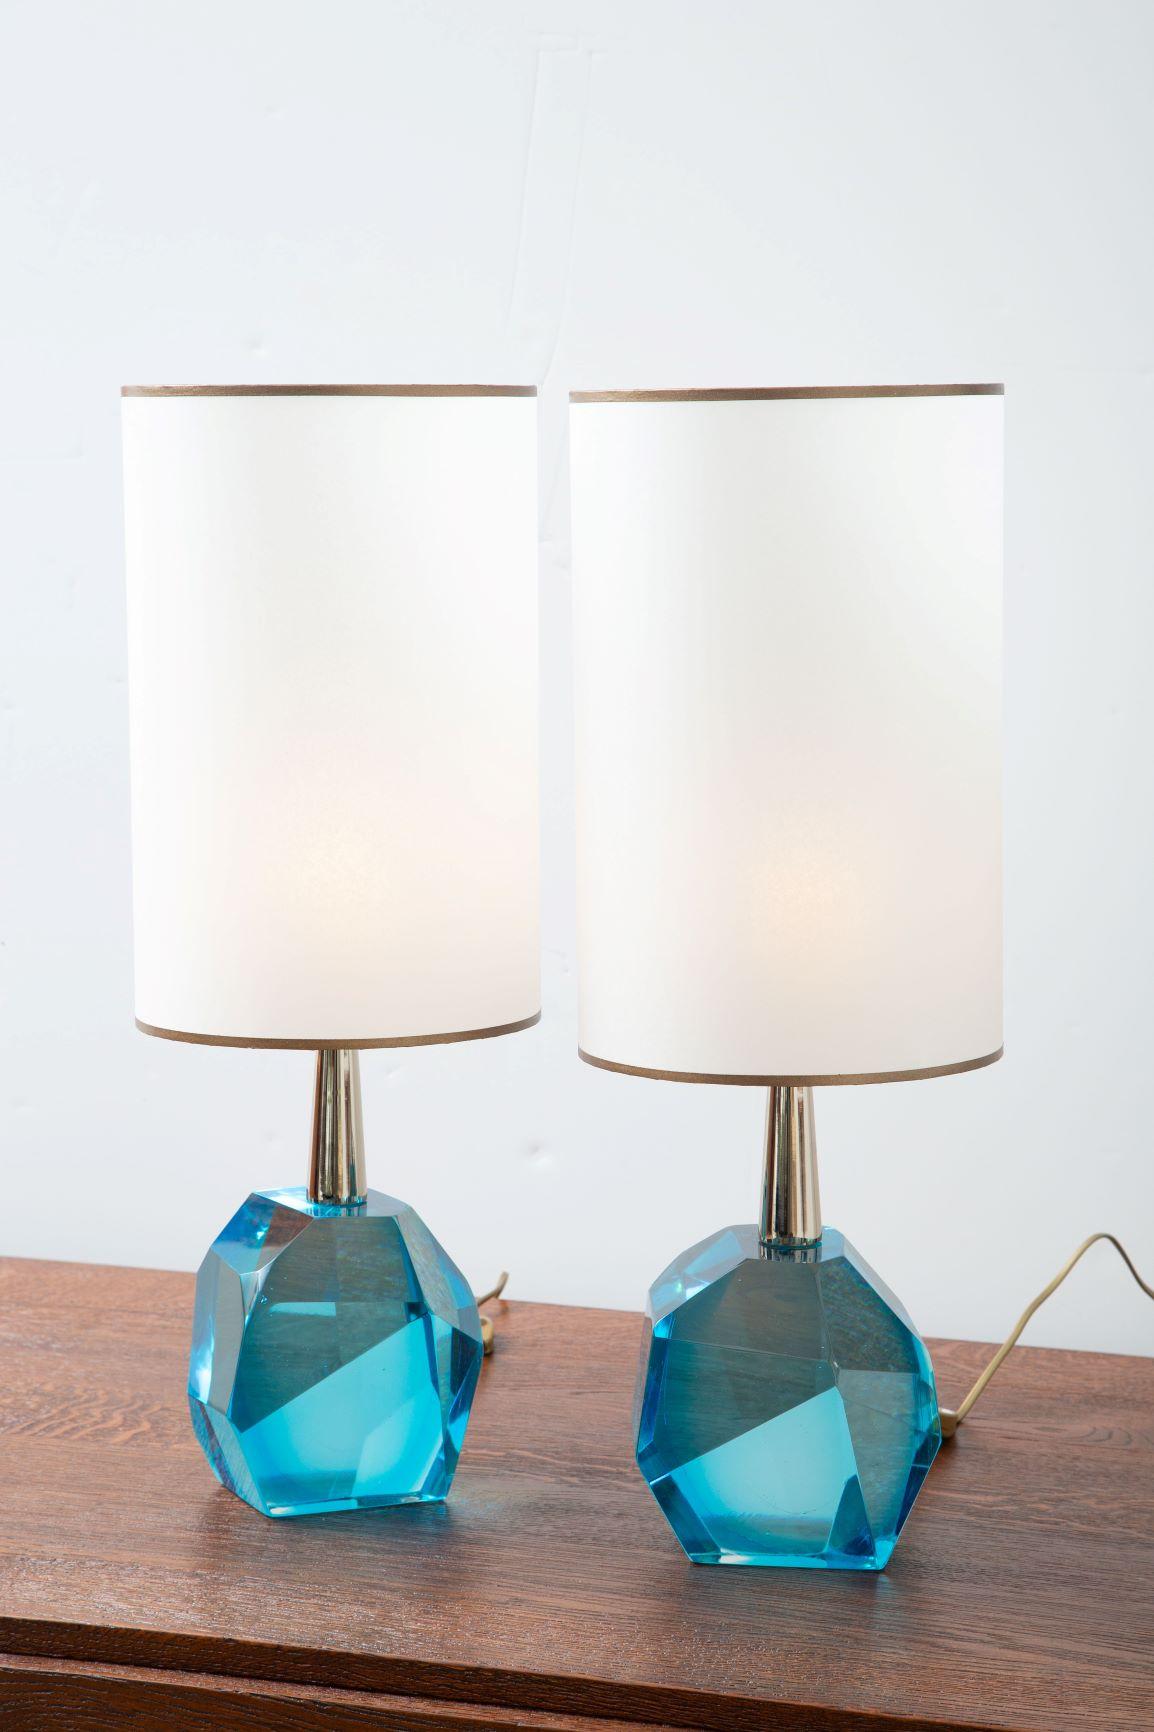 Pair of faceted diamond table lamps, in stock
Studio-made heavy solid rock translucent Murano glass
Aqua marine hue
Custom made parchment shades included.
Located in our store in Miami ready for shipping now.
3 pairs available
Priced per